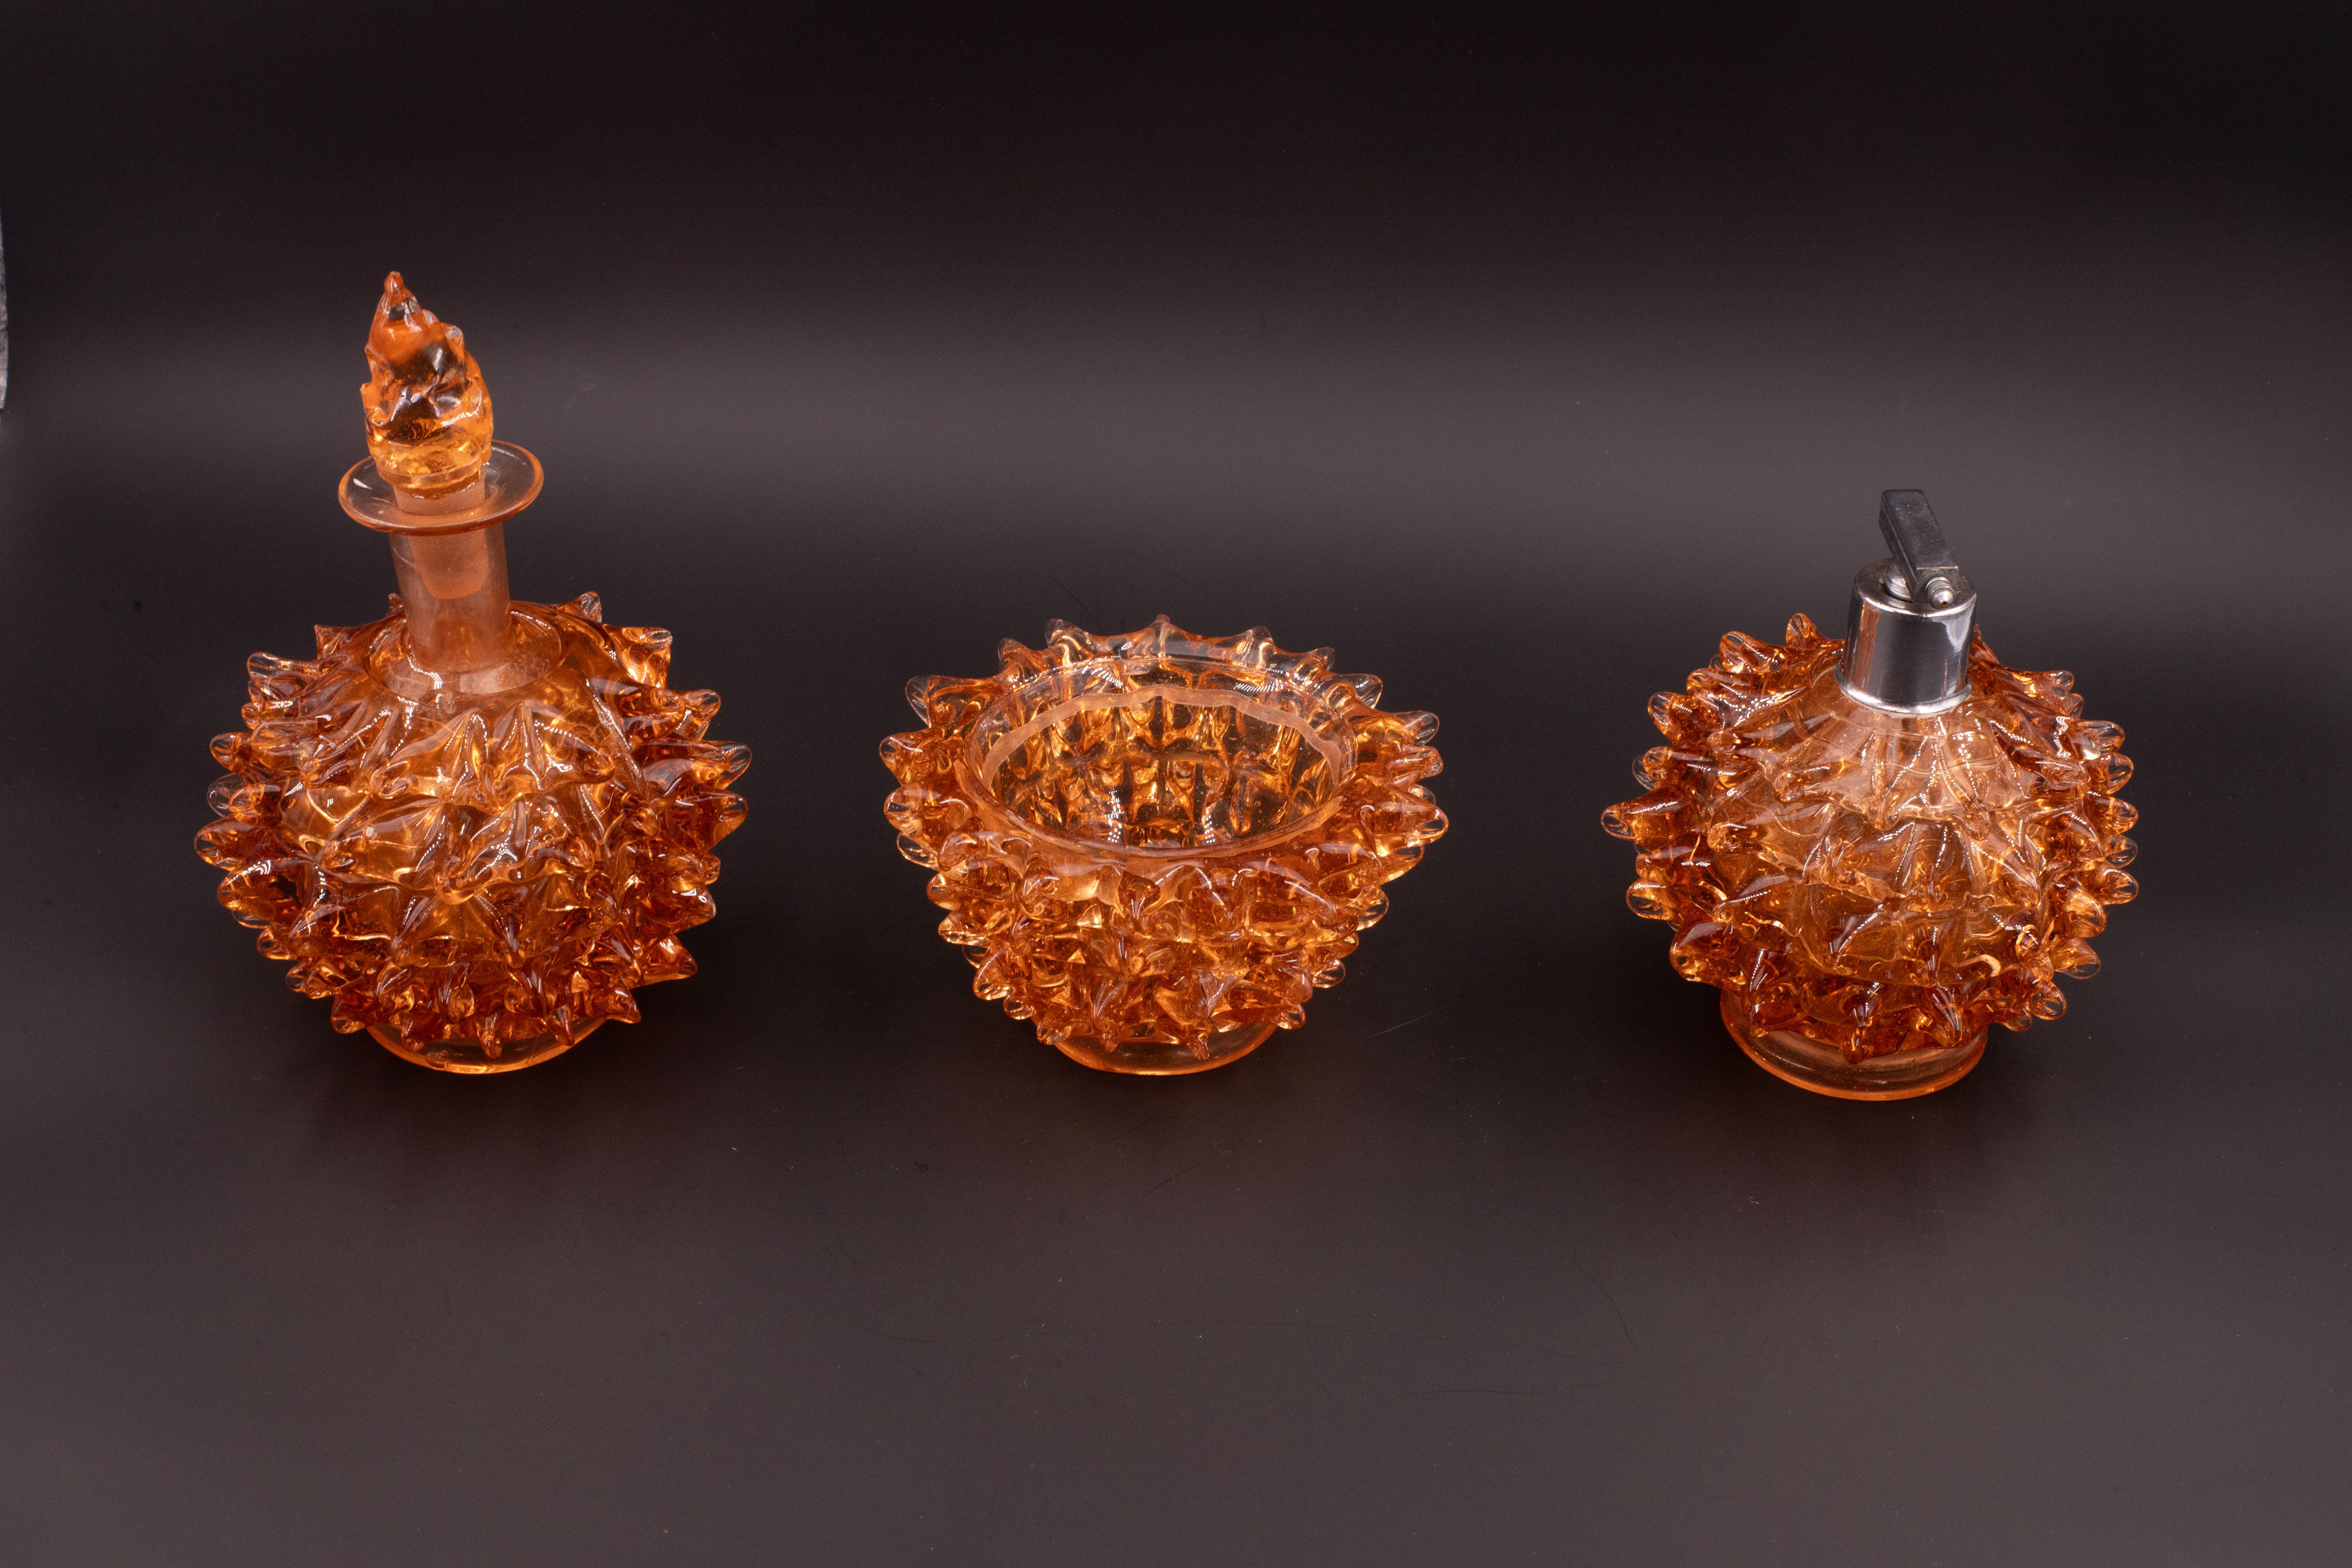 European Rare Set of 3 Amber Rostrato Murano Glass Vases by Barovier & Toso, 1940s For Sale